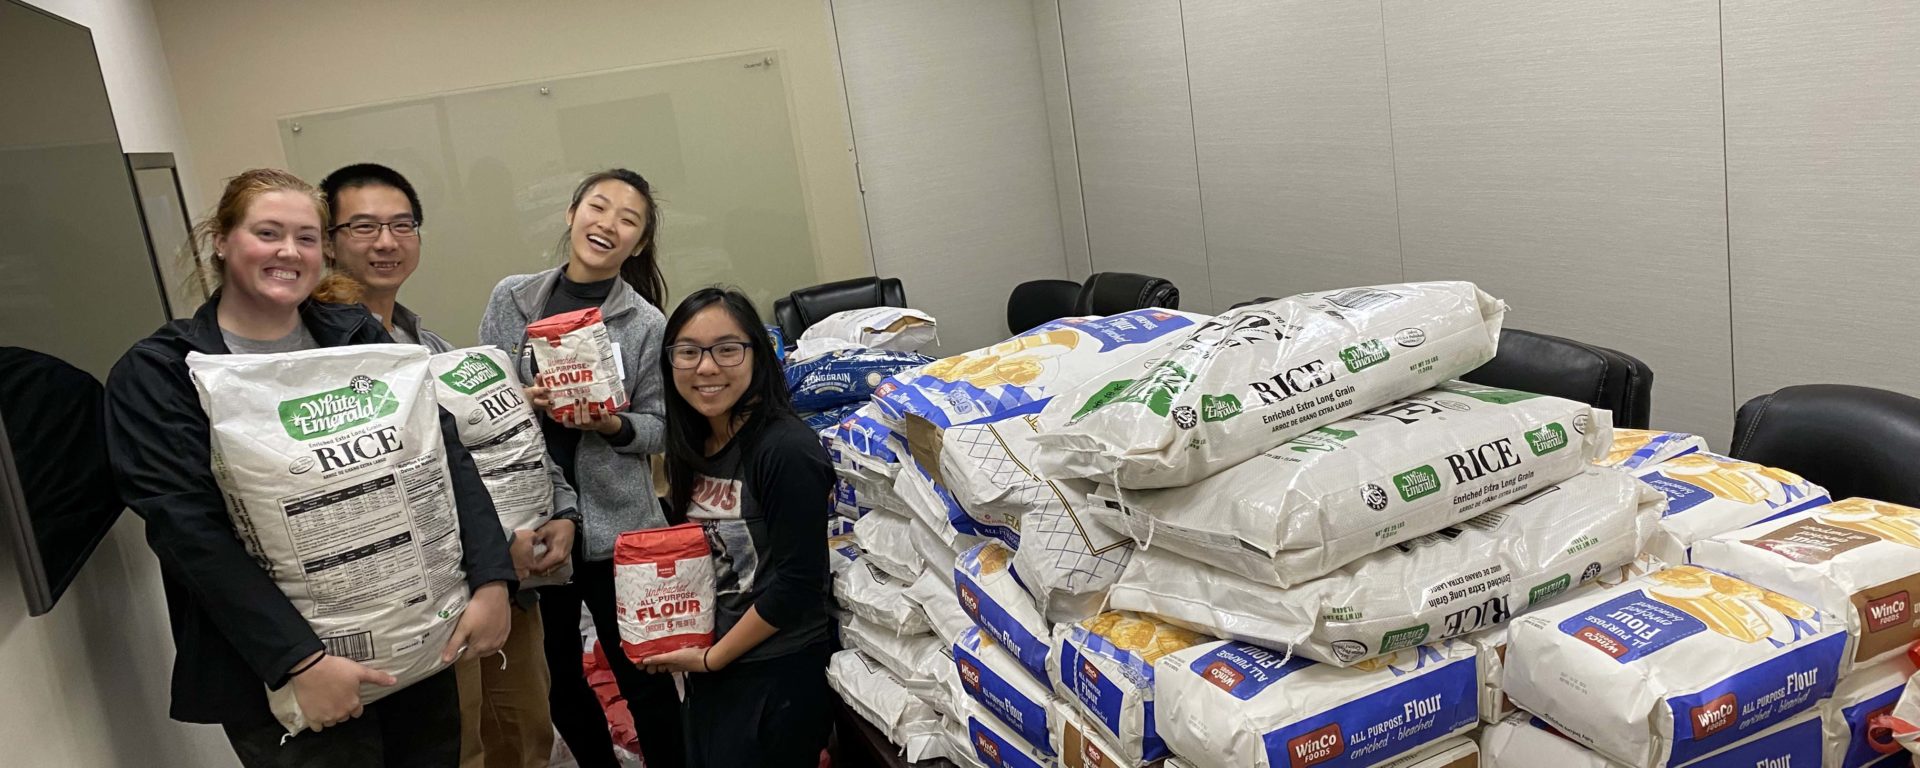 The Touro University Nevada community lived its mission of service to humanity thanks to two great fundraising initiatives that led to thousands of dollars and canned food donations in early December.